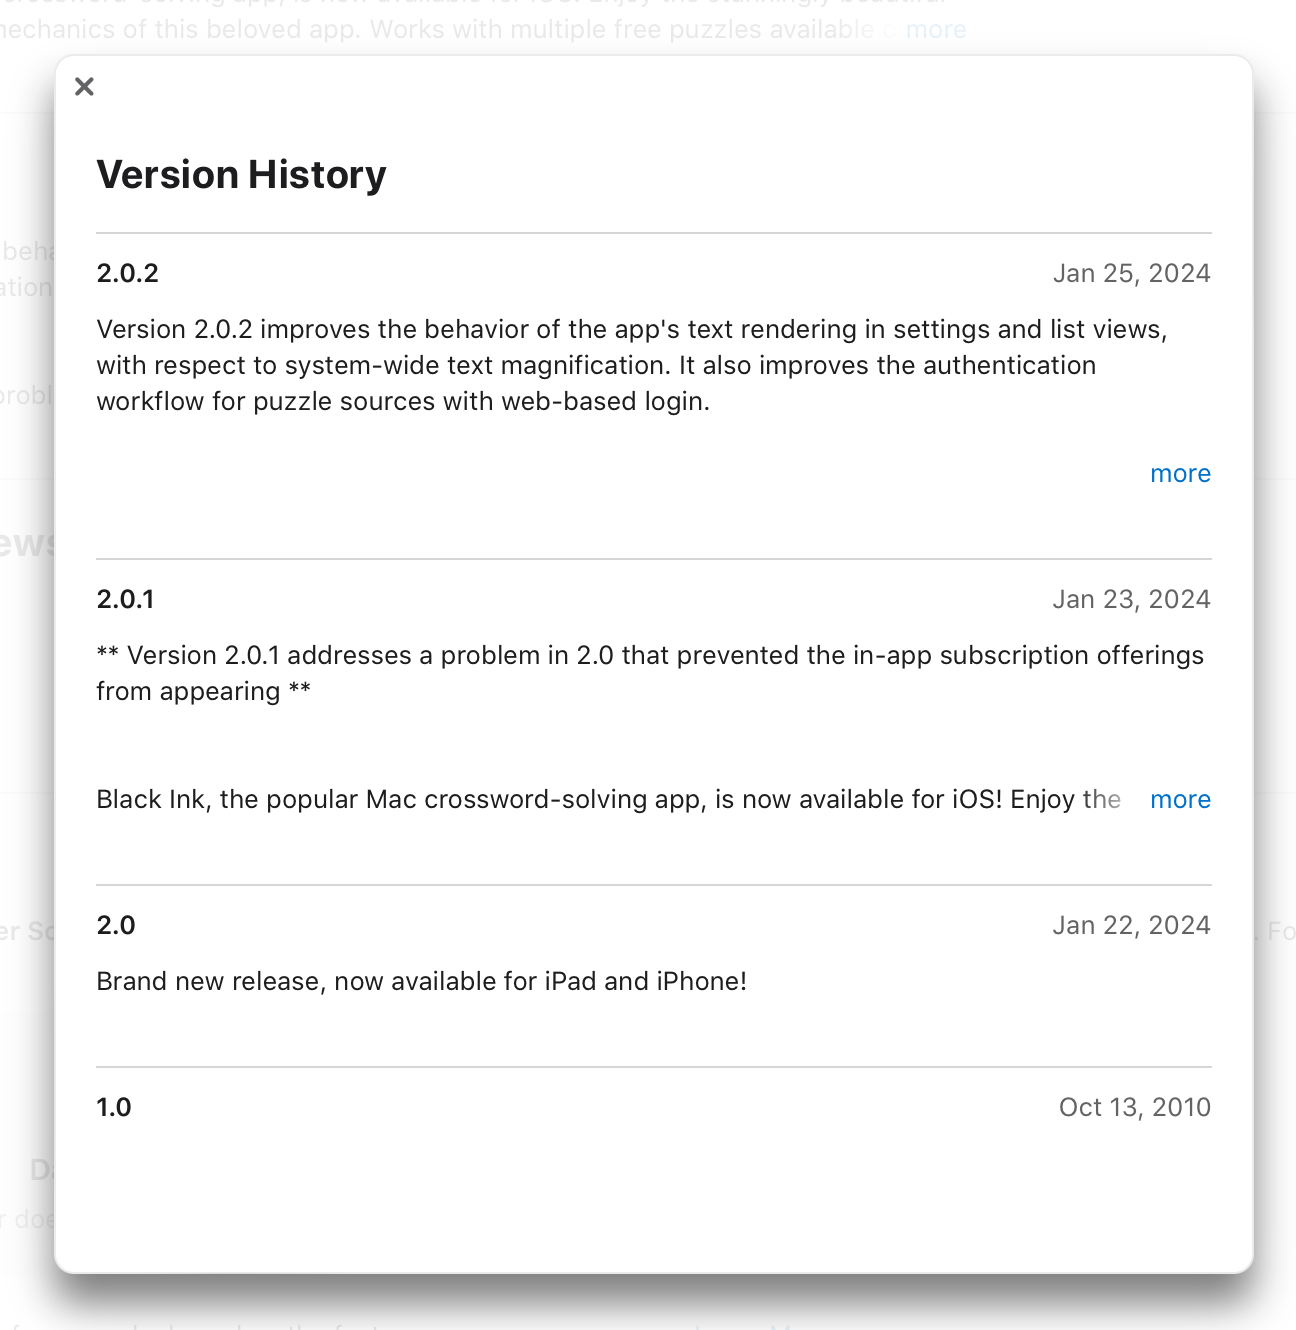 Screenshot showing Black Ink Release notes spanning from the current 2.0.2 to 2.0 just a few days ago, and 1.0 13 yaers ago.